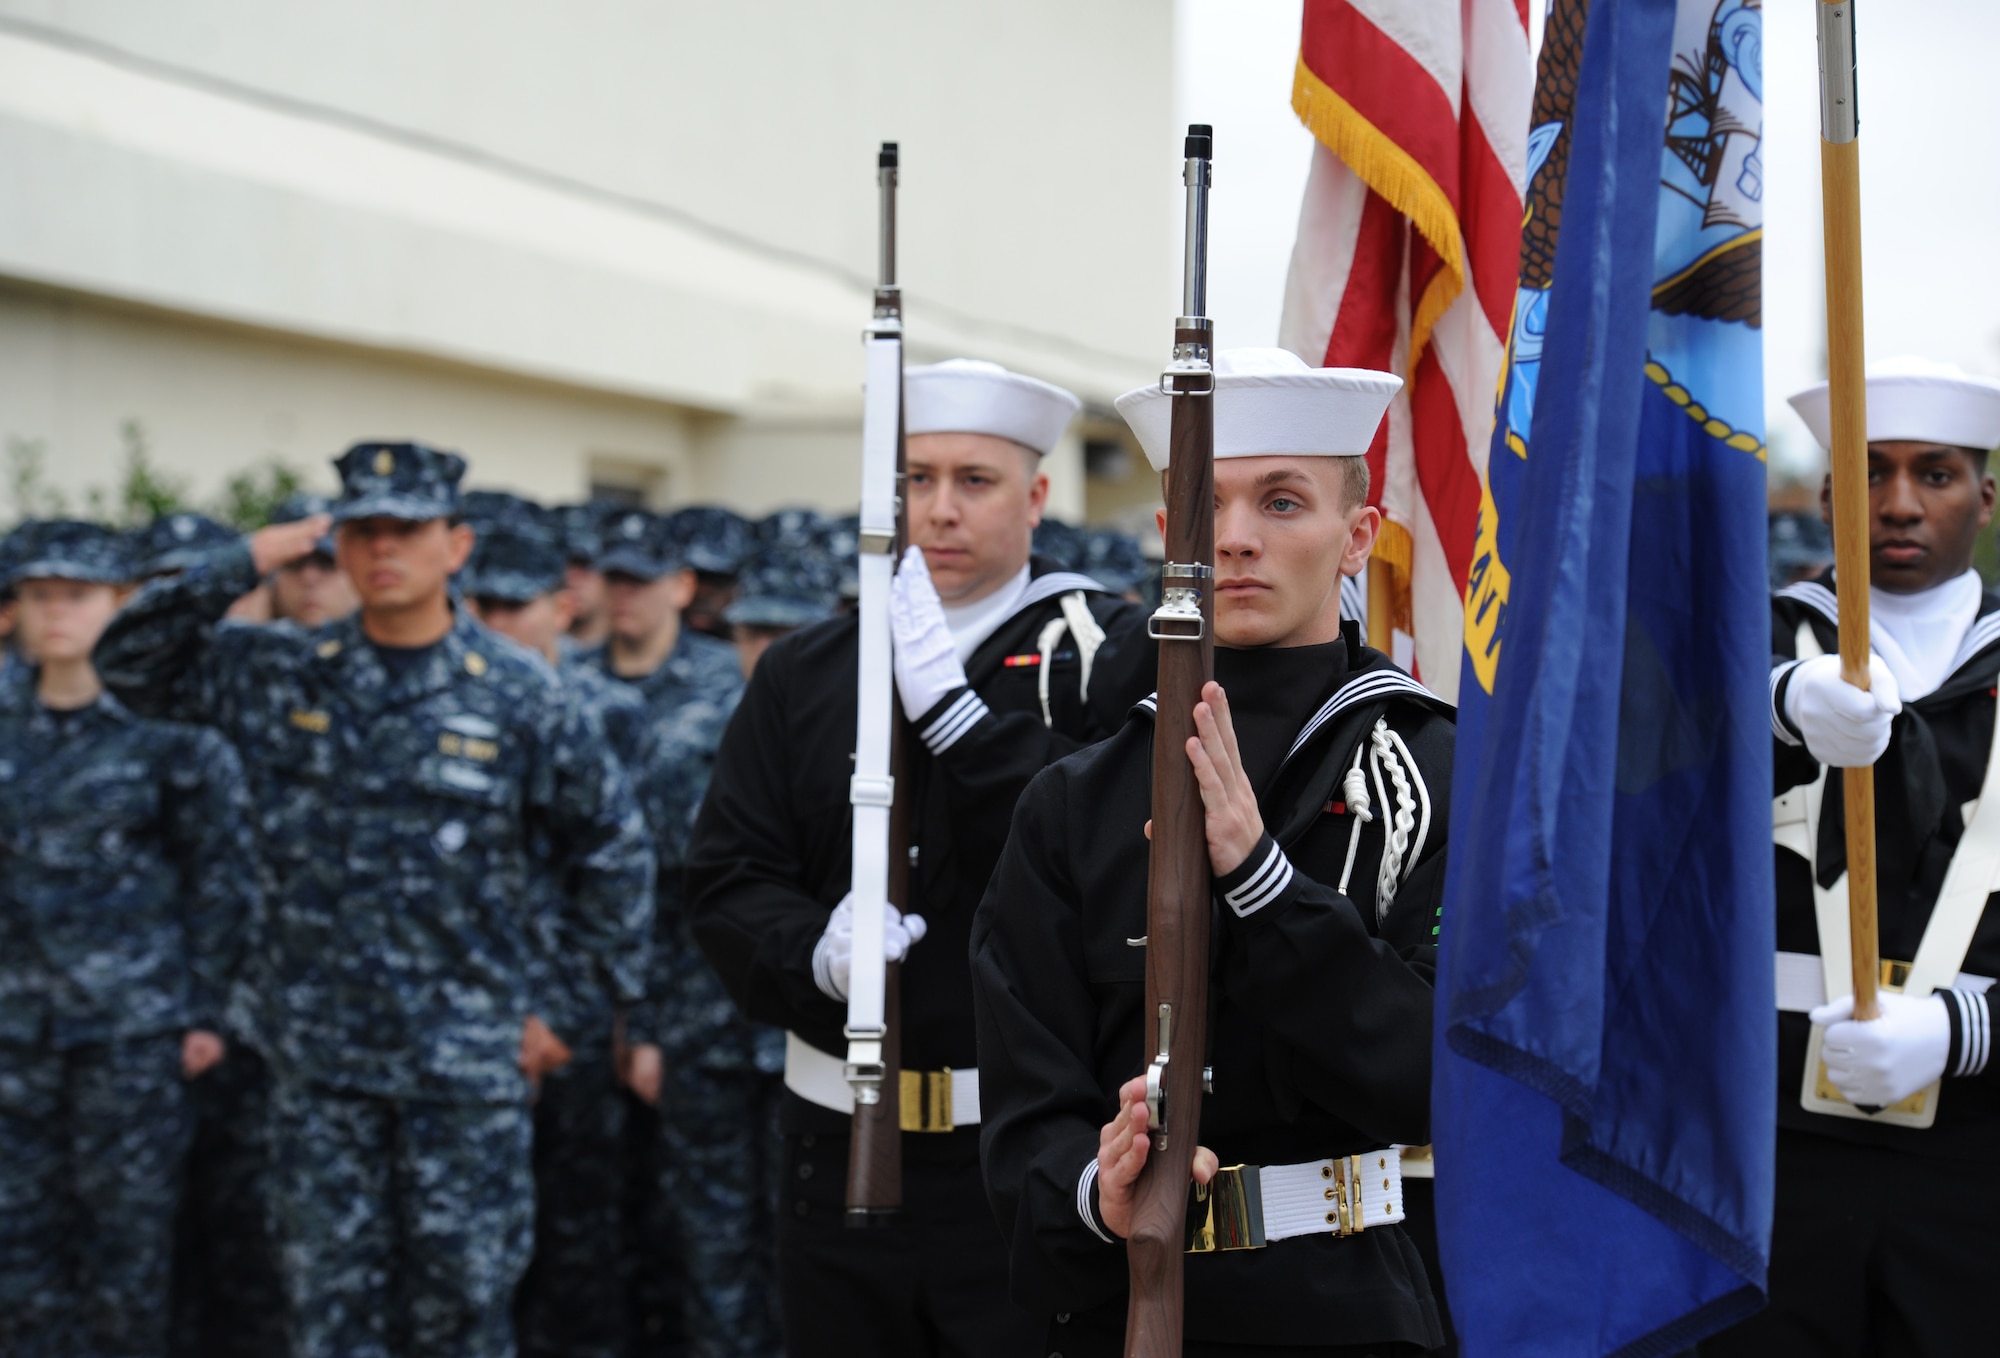 Center for Naval Aviation Technical Training Unit Keesler Honor Guard members post the colors during a CNATTU Keesler Pearl Harbor 75th Anniversary Remembrance Ceremony in front of Allee Hall Dec. 7, 2016, on Keesler Air Force Base, Miss. More than 100 Keesler personnel attended the event to honor those lost in the Dec. 7, 1941 Pearl Harbor attacks. (U.S. Air Force photo by Kemberly Groue)